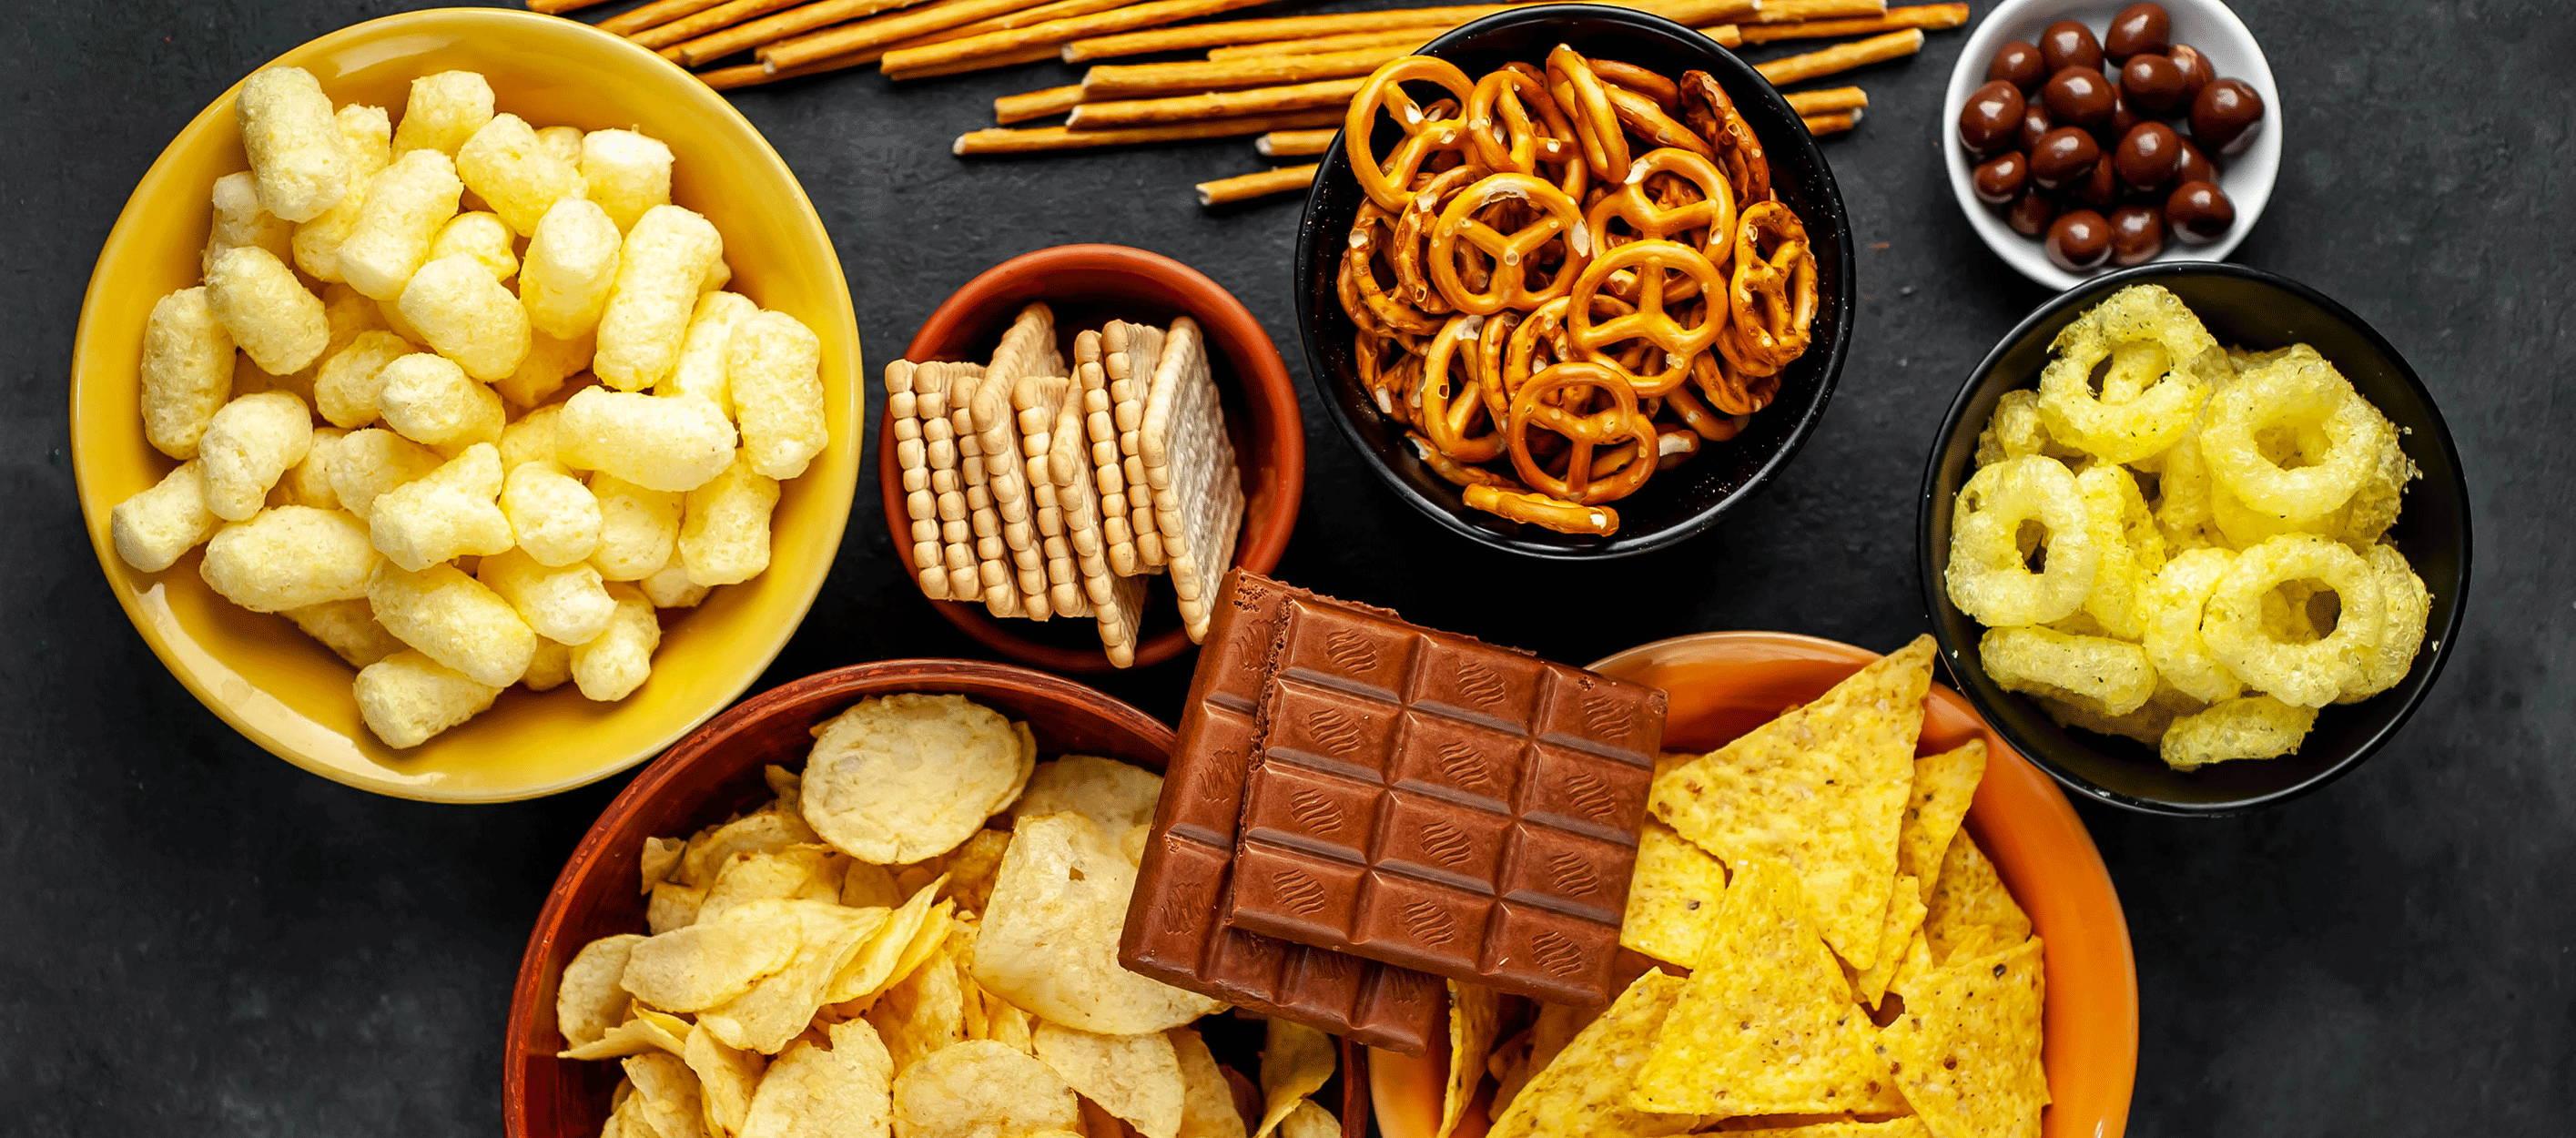 assorted snack foods in bowls